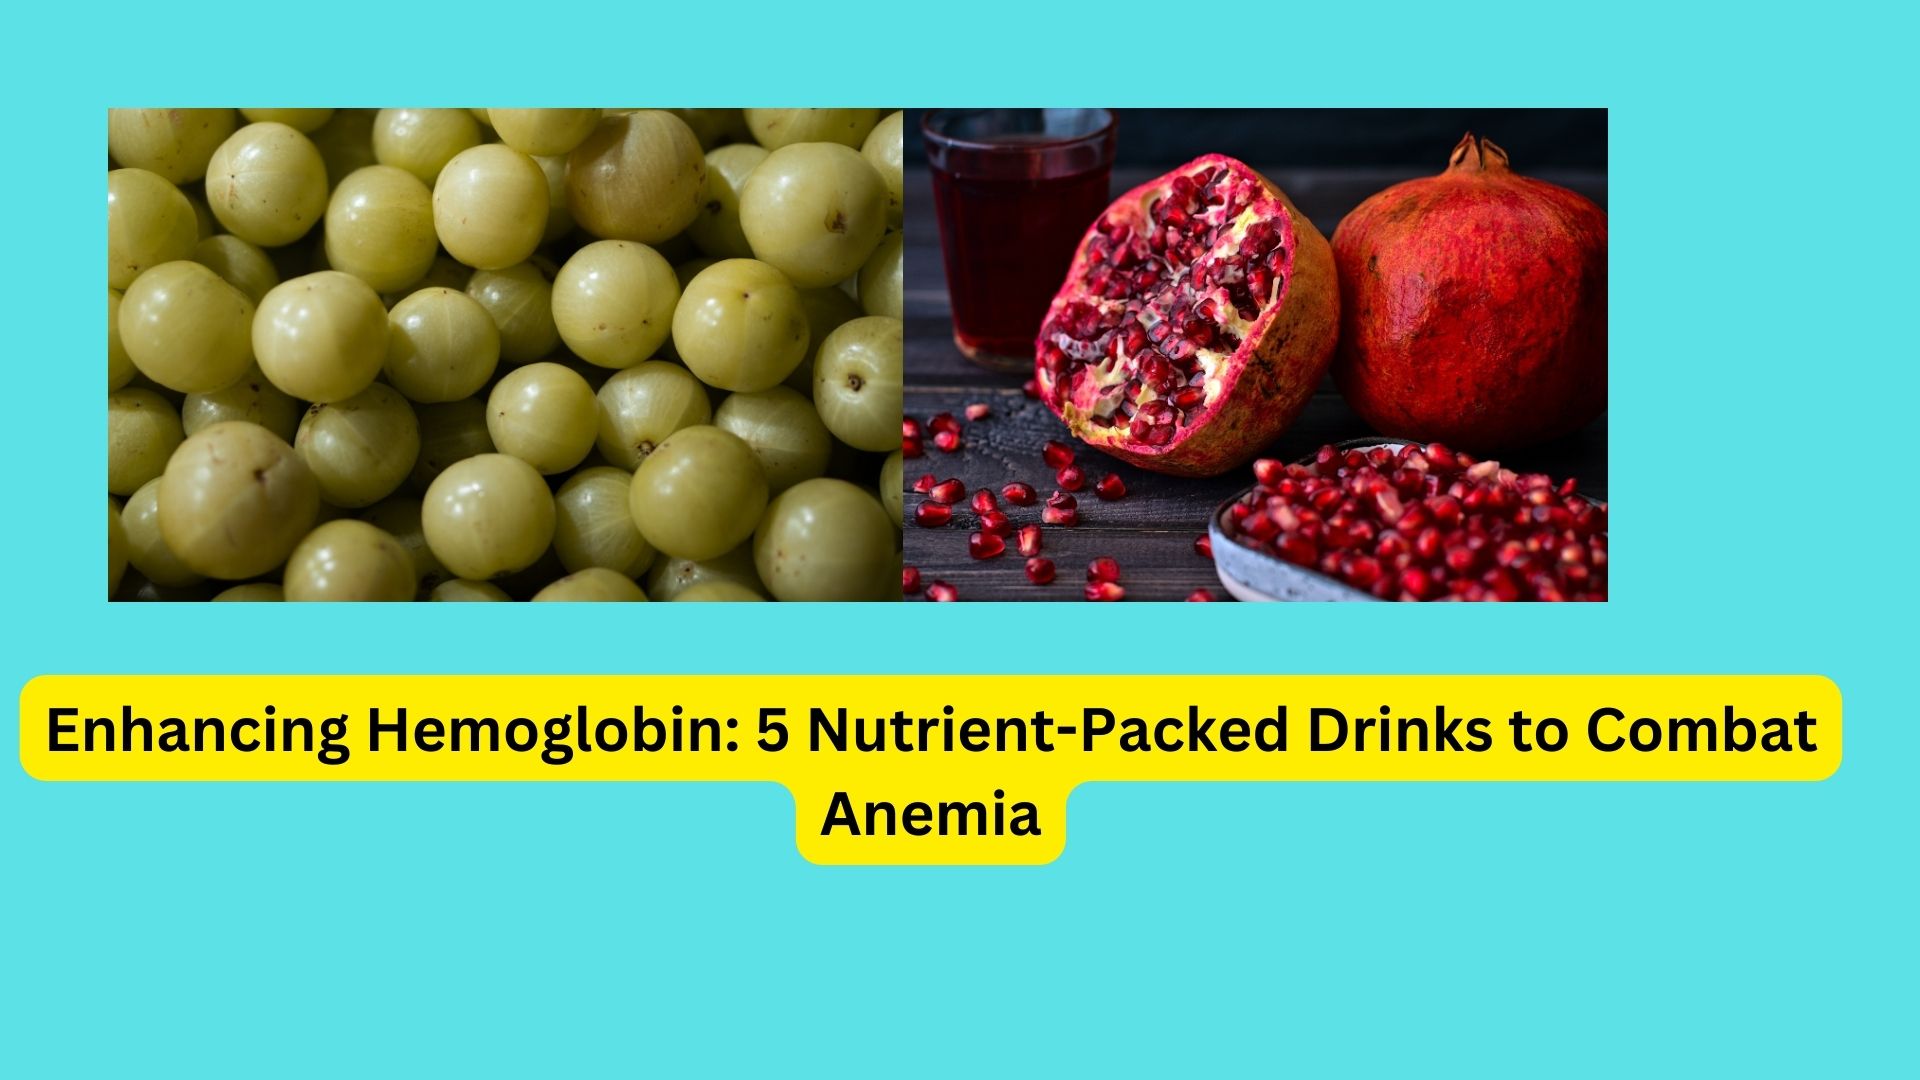 Enhancing Hemoglobin: 5 Nutrient-Packed Drinks to Combat Anemia